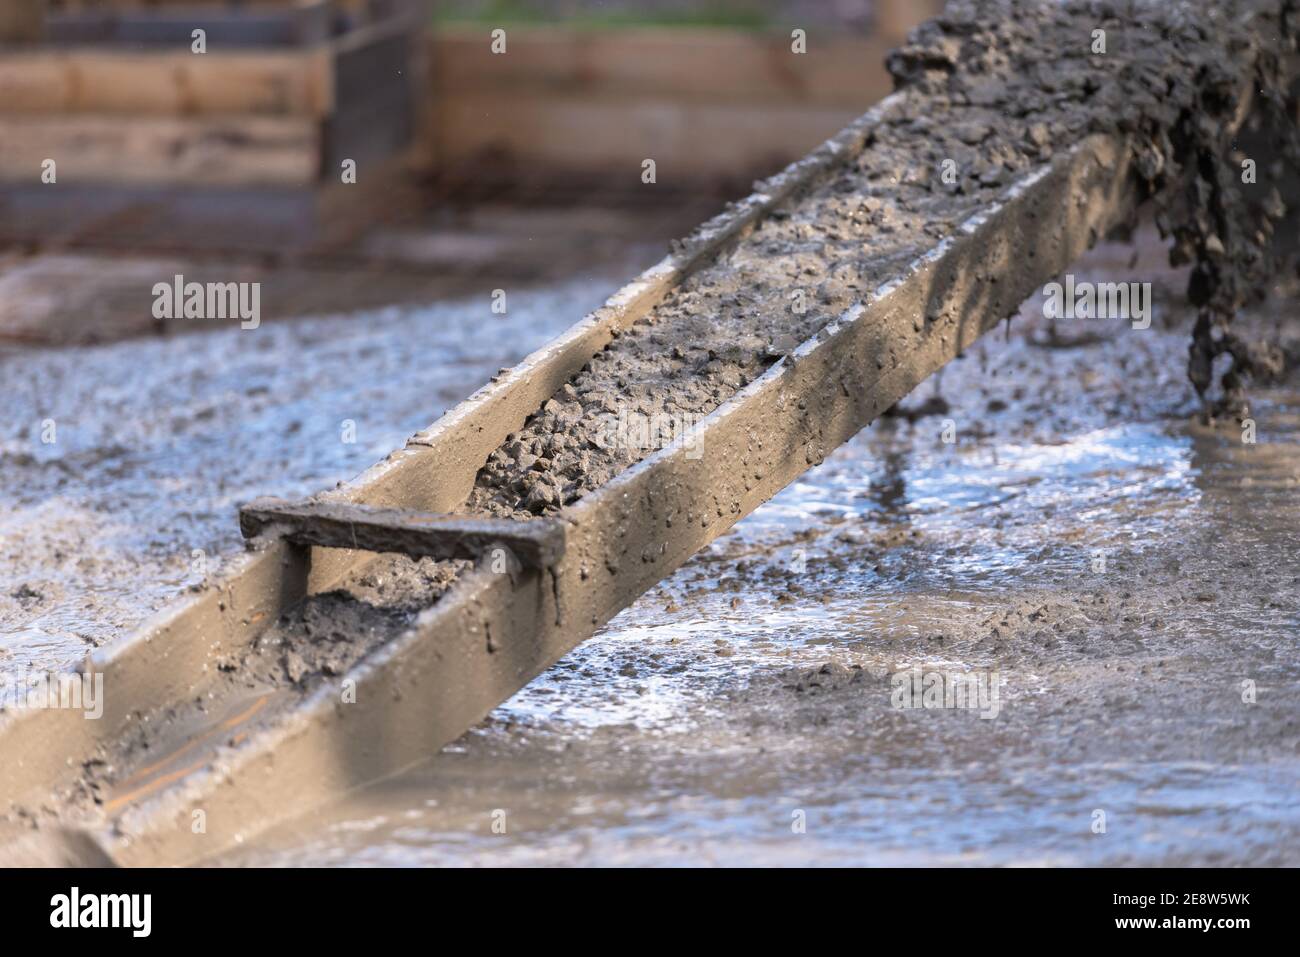 Self-made chute for concreting works. Concrete pours down a wooden chute Stock Photo